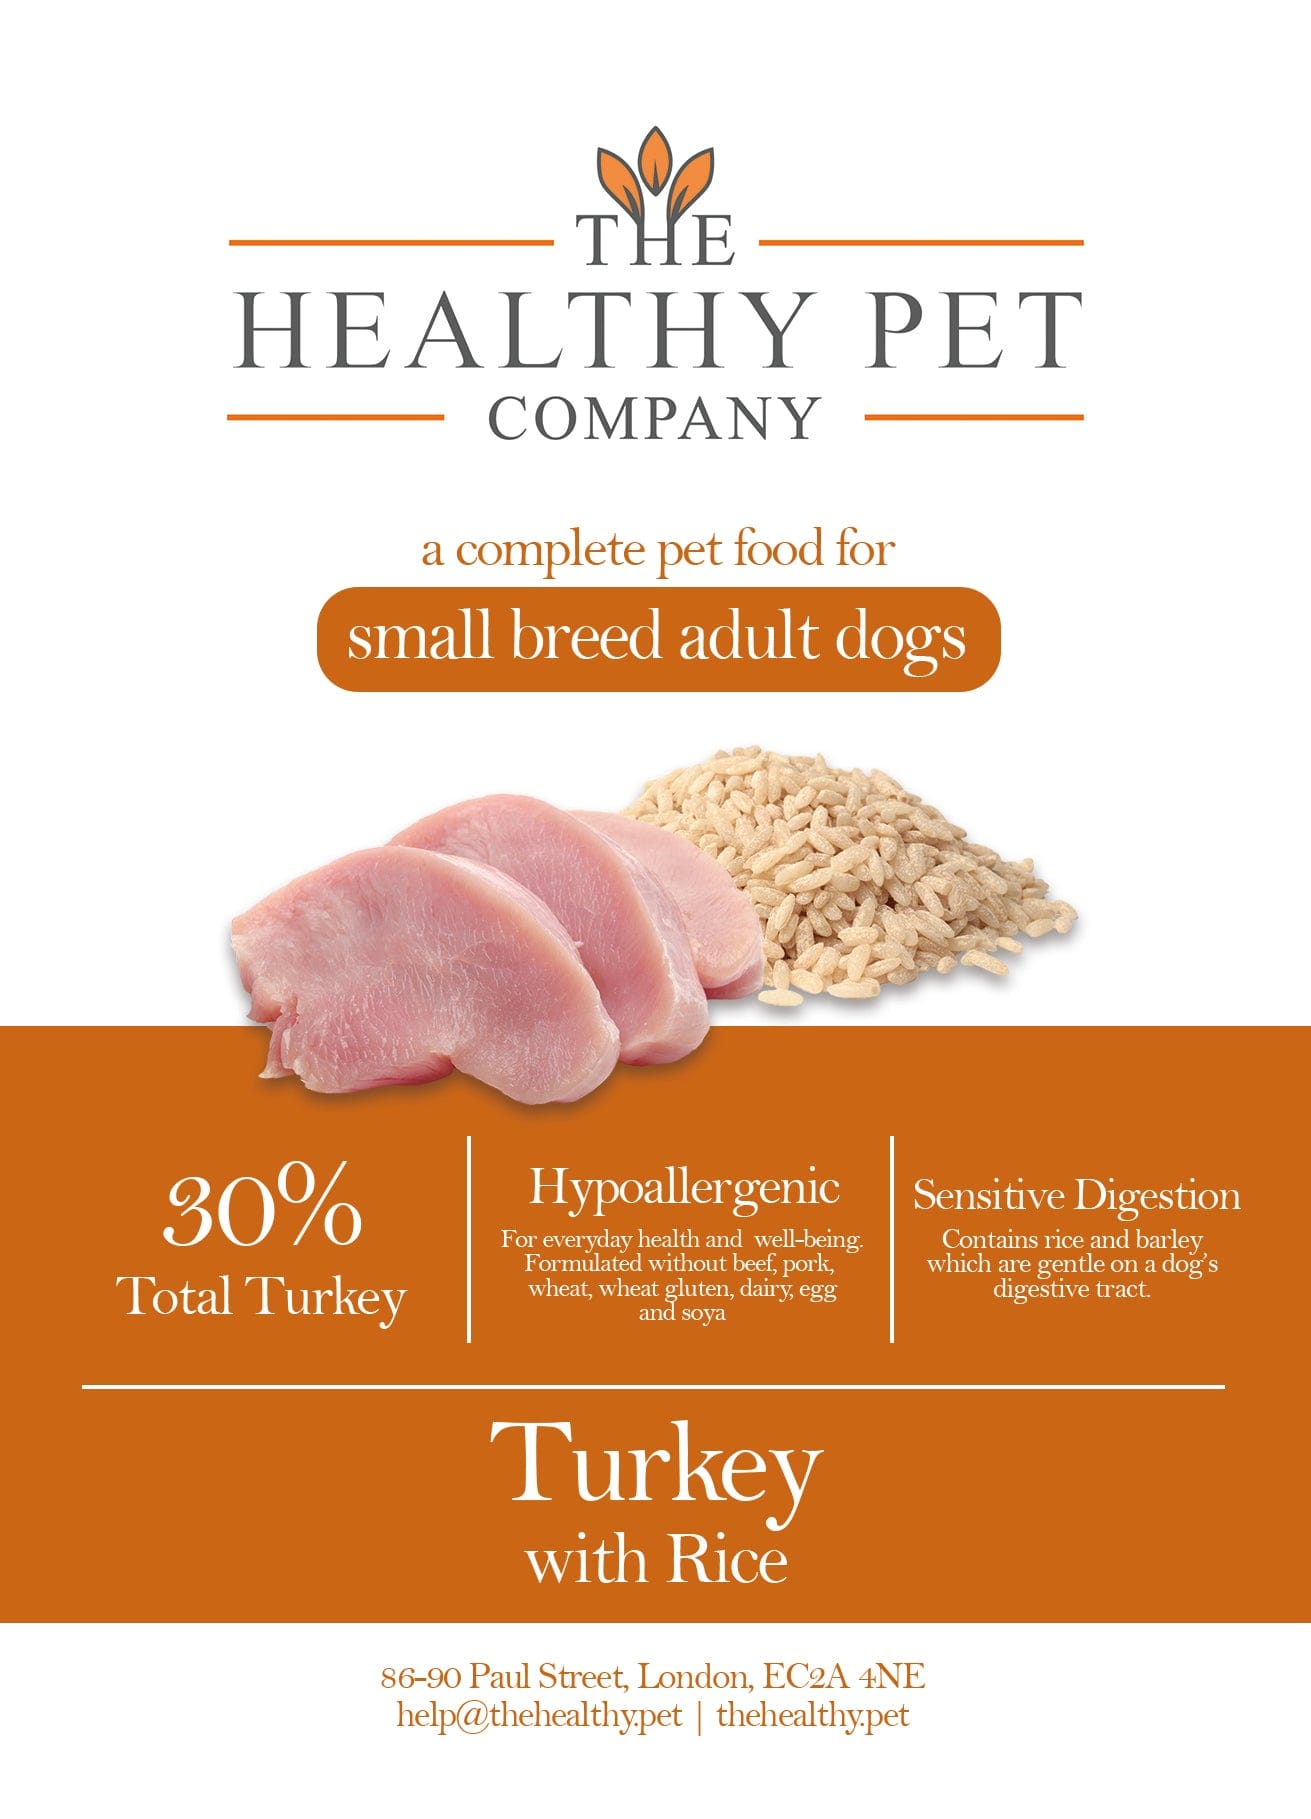 The Healthy Pet Company Complete Meal - Turkey with Rice for Small Breed Adult Dogs - The Healthy Pet Company